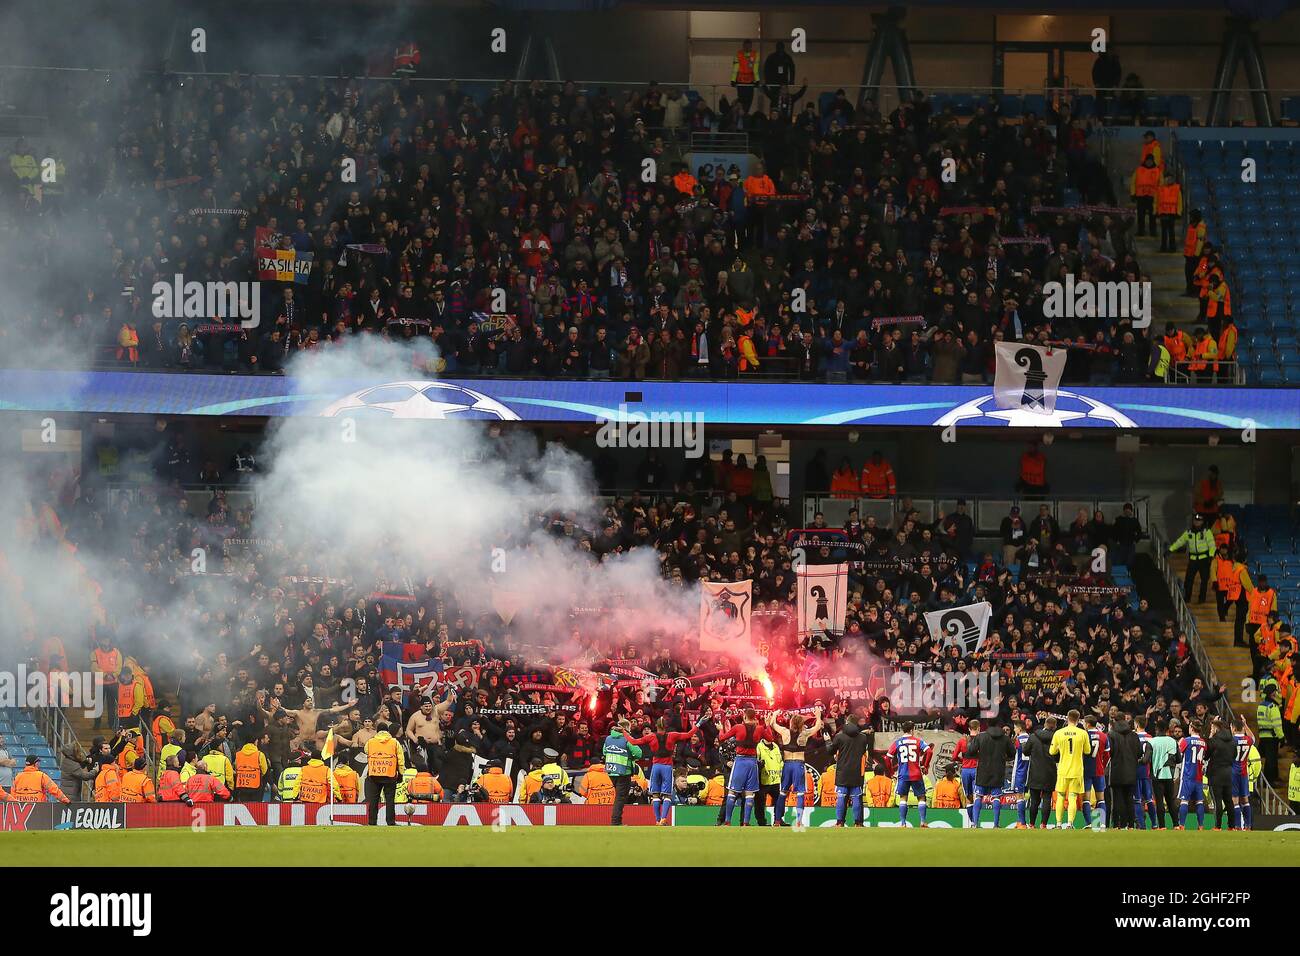 FC Basel players celebrate with fans after the match - Manchester City v FC Basel, UEFA Champions League, Round of 16 - Second Leg, Etihad Stadium, Manchester - 7th March 2018. Stock Photo